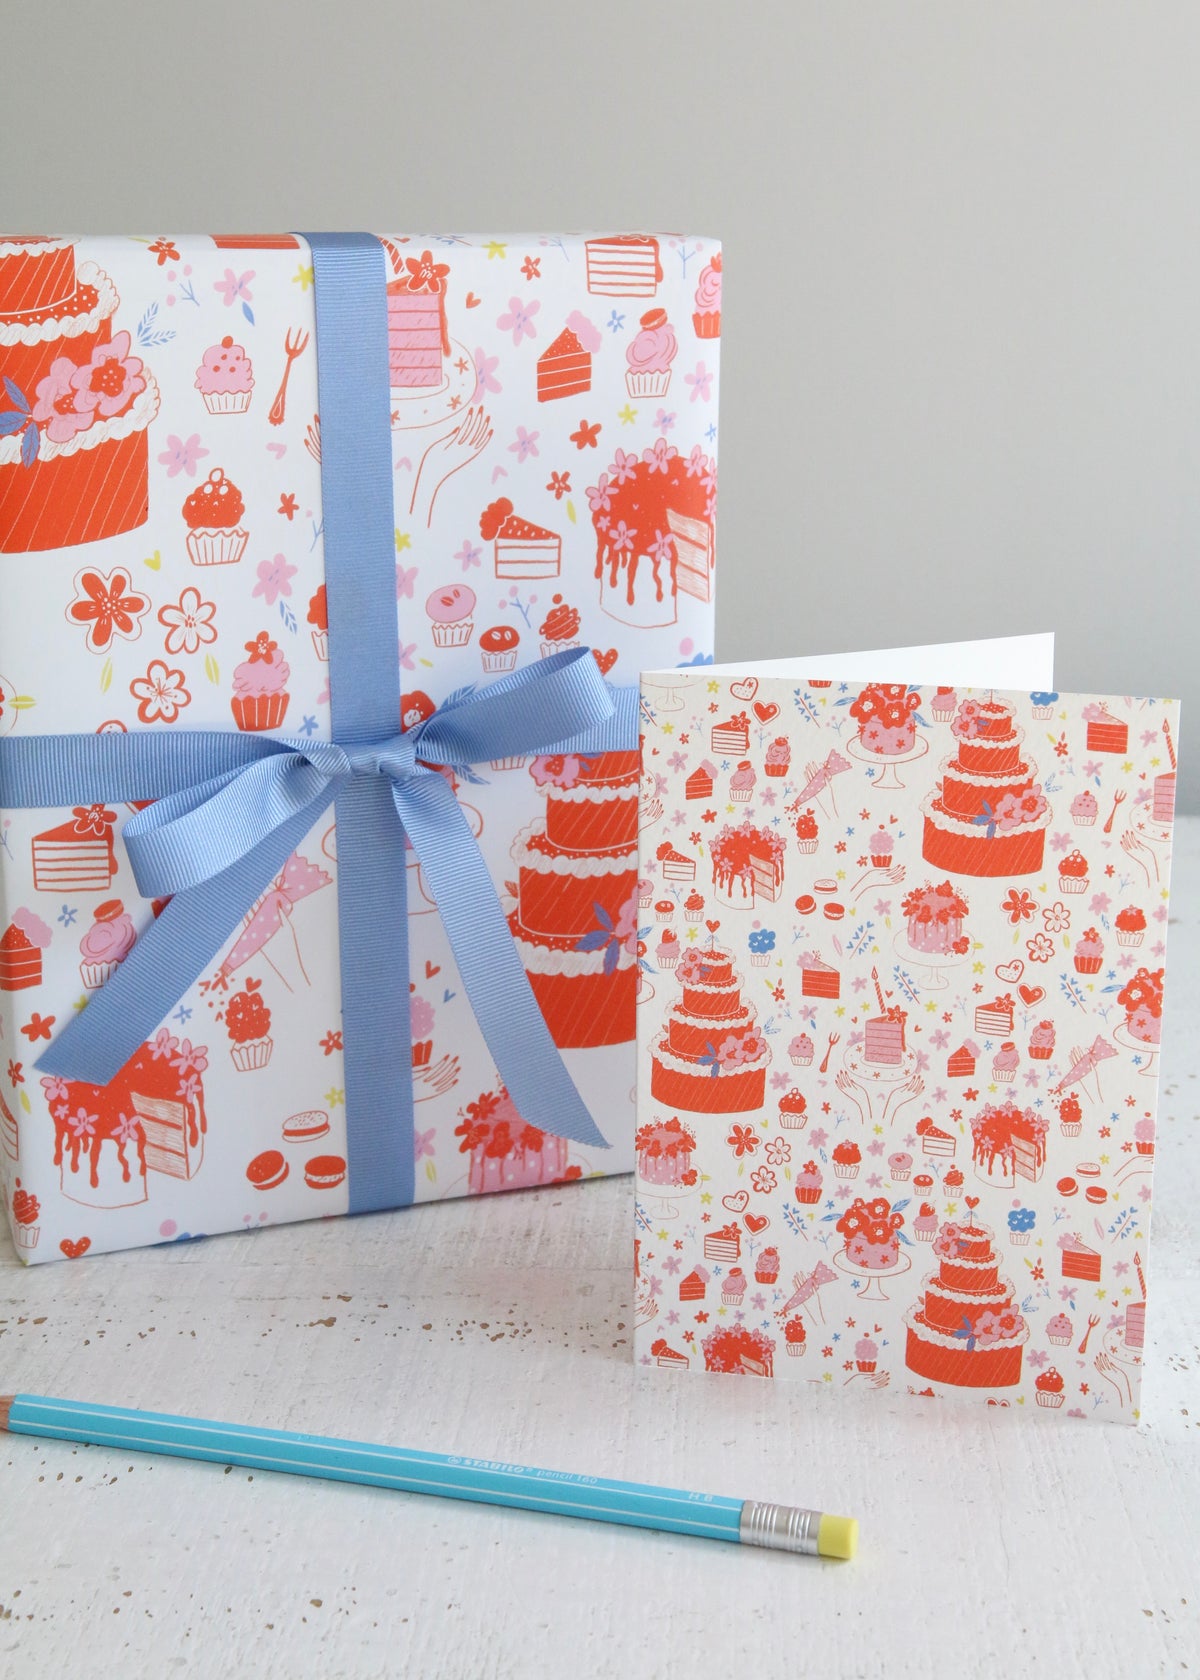 'Spreading Sweetness' Cake & Cupcake Illustrated Card & Wrapping Paper